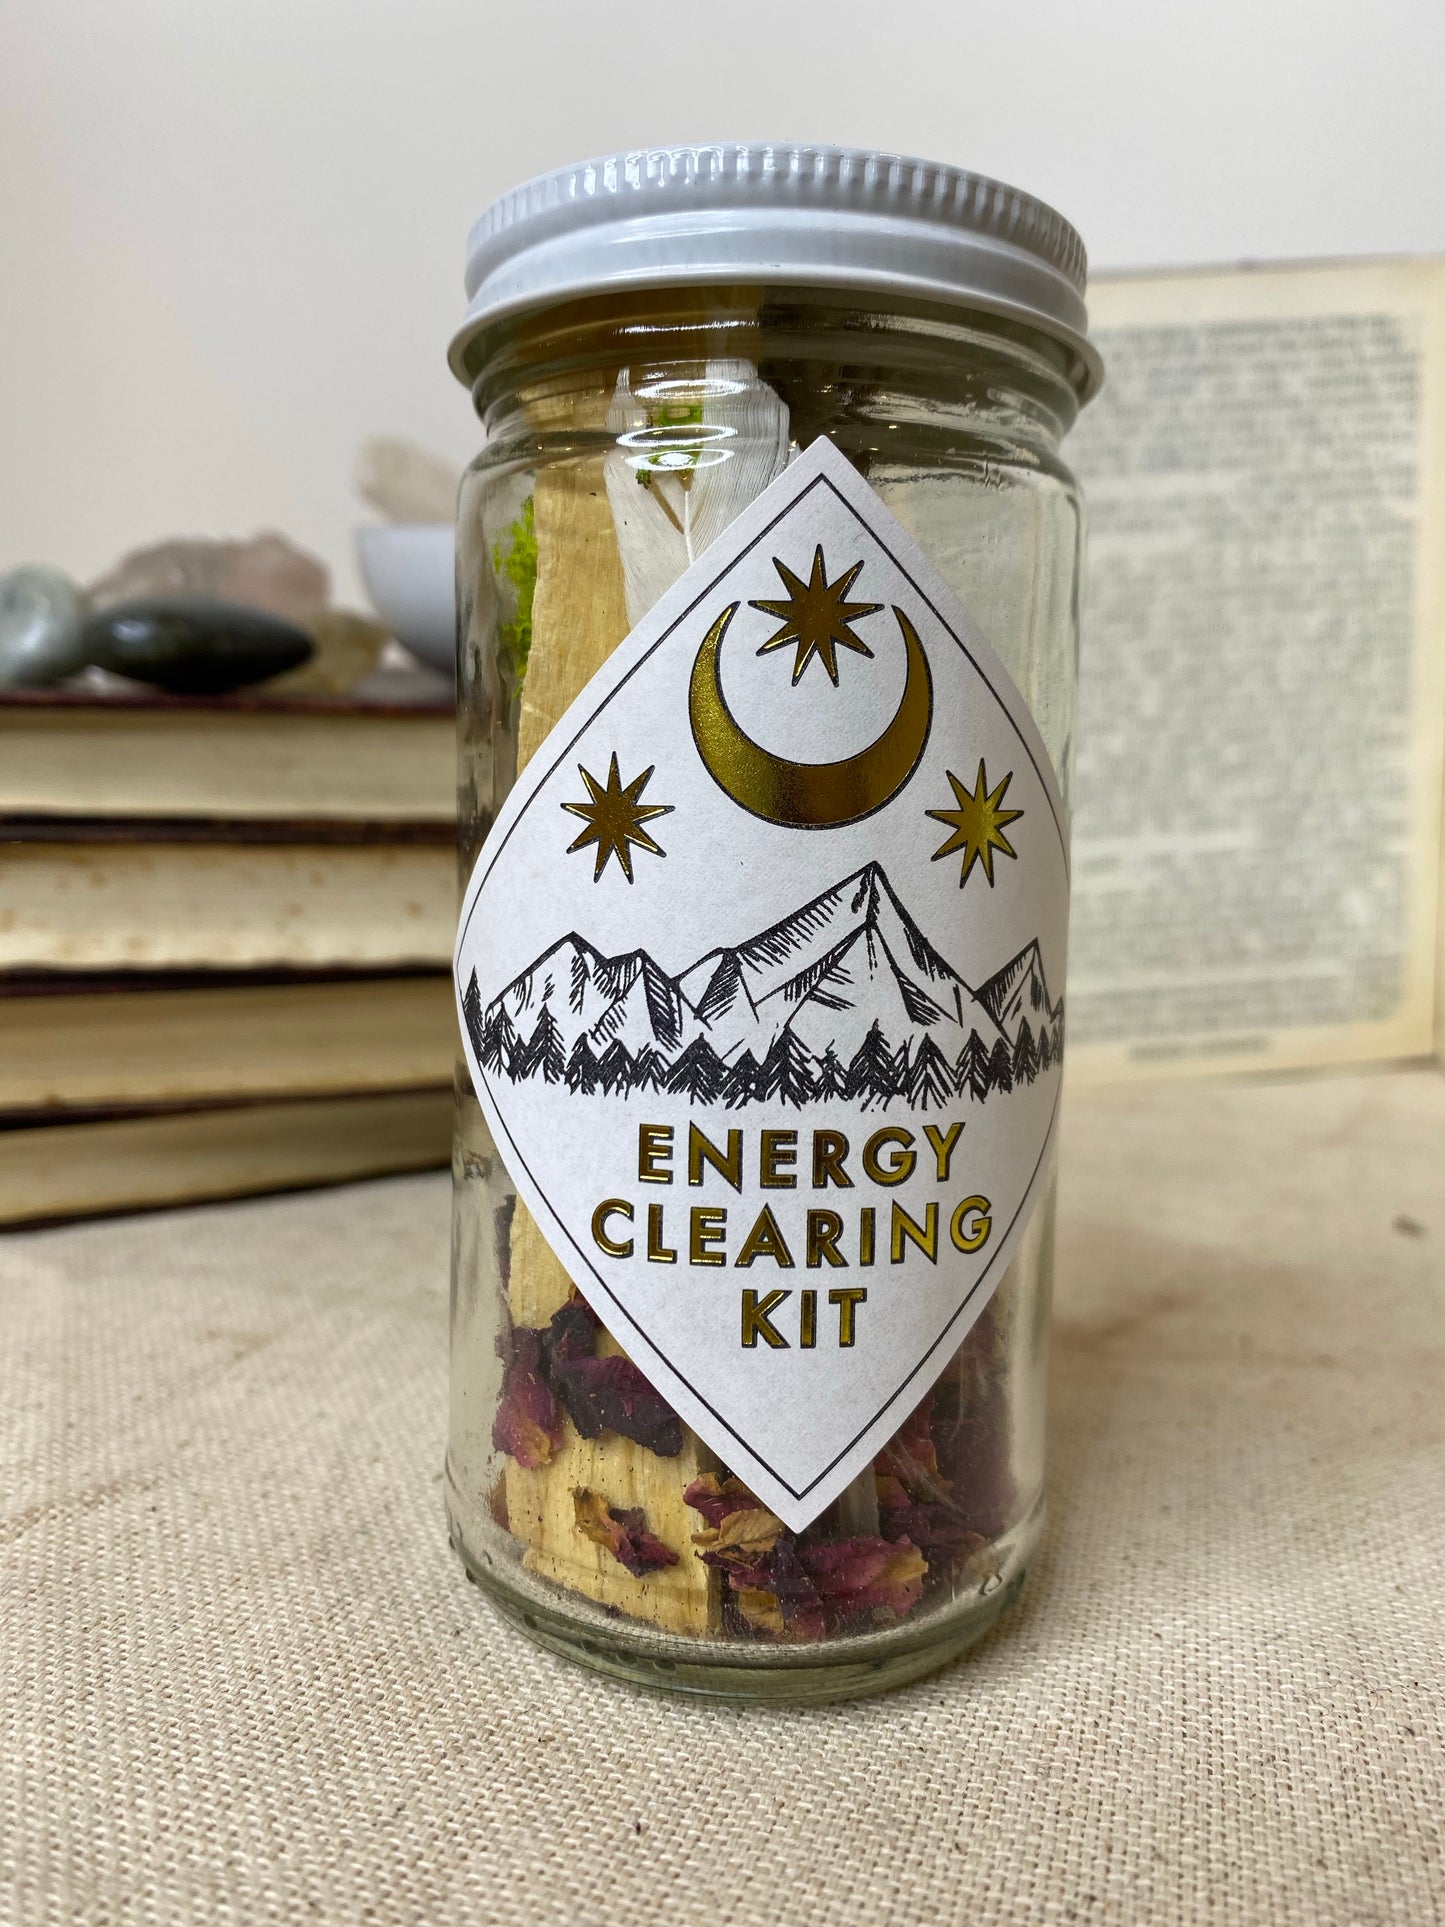 Energy clearing kit